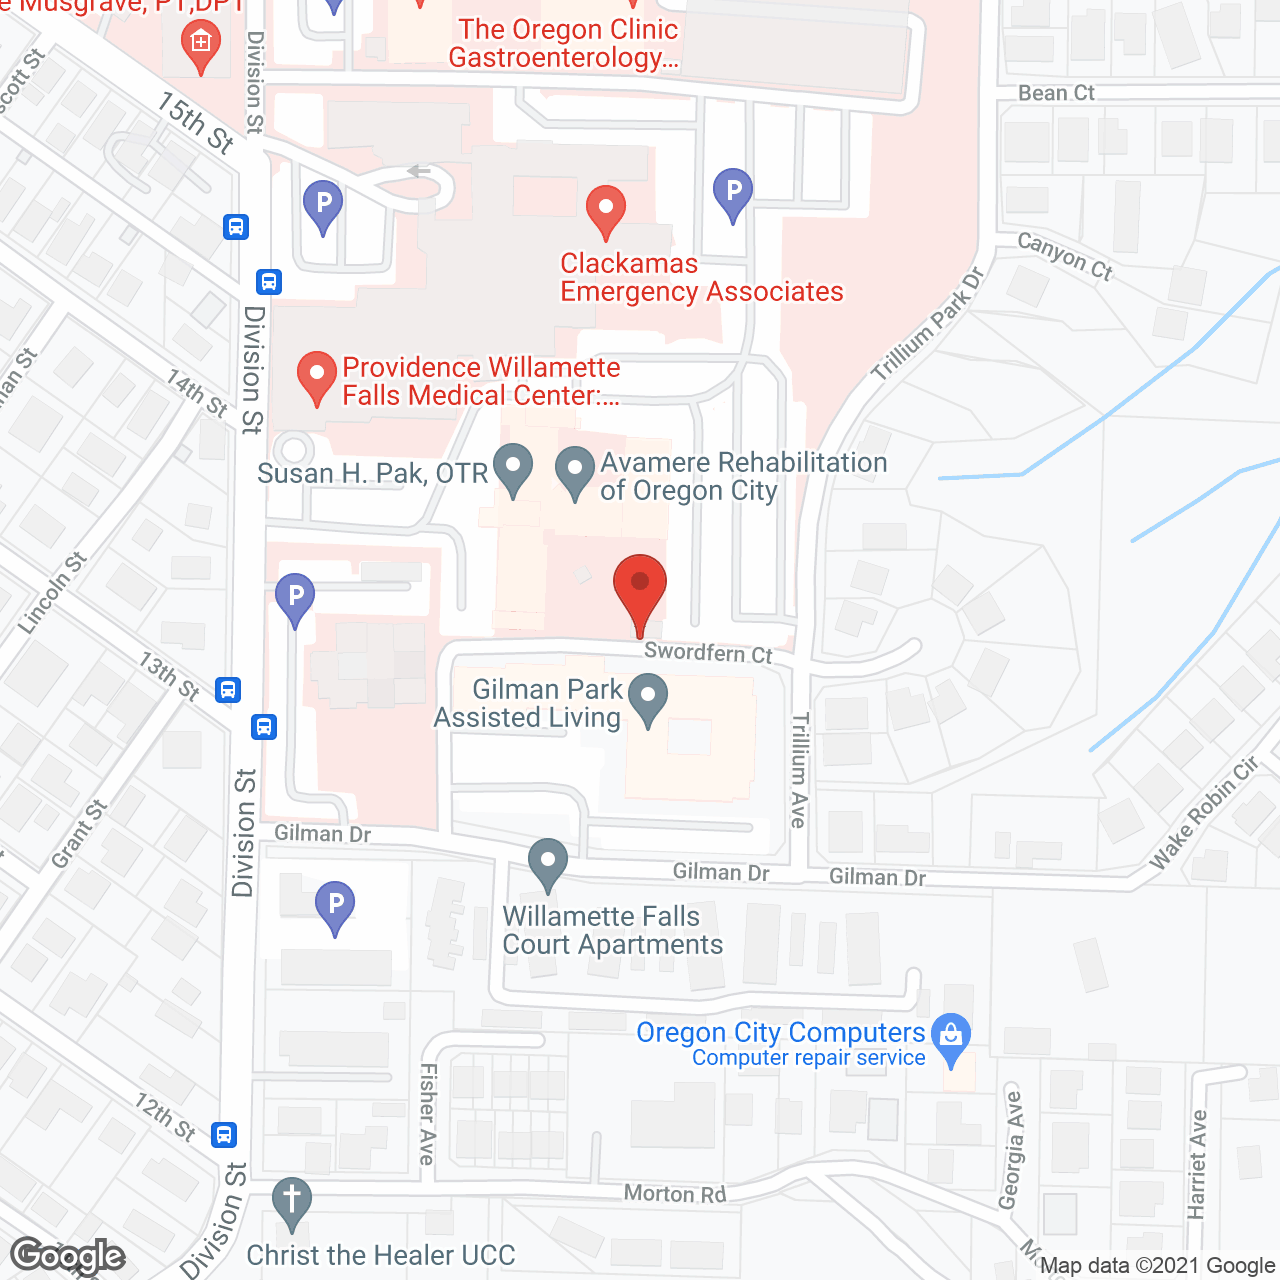 Gilman Park Assisted Living in google map